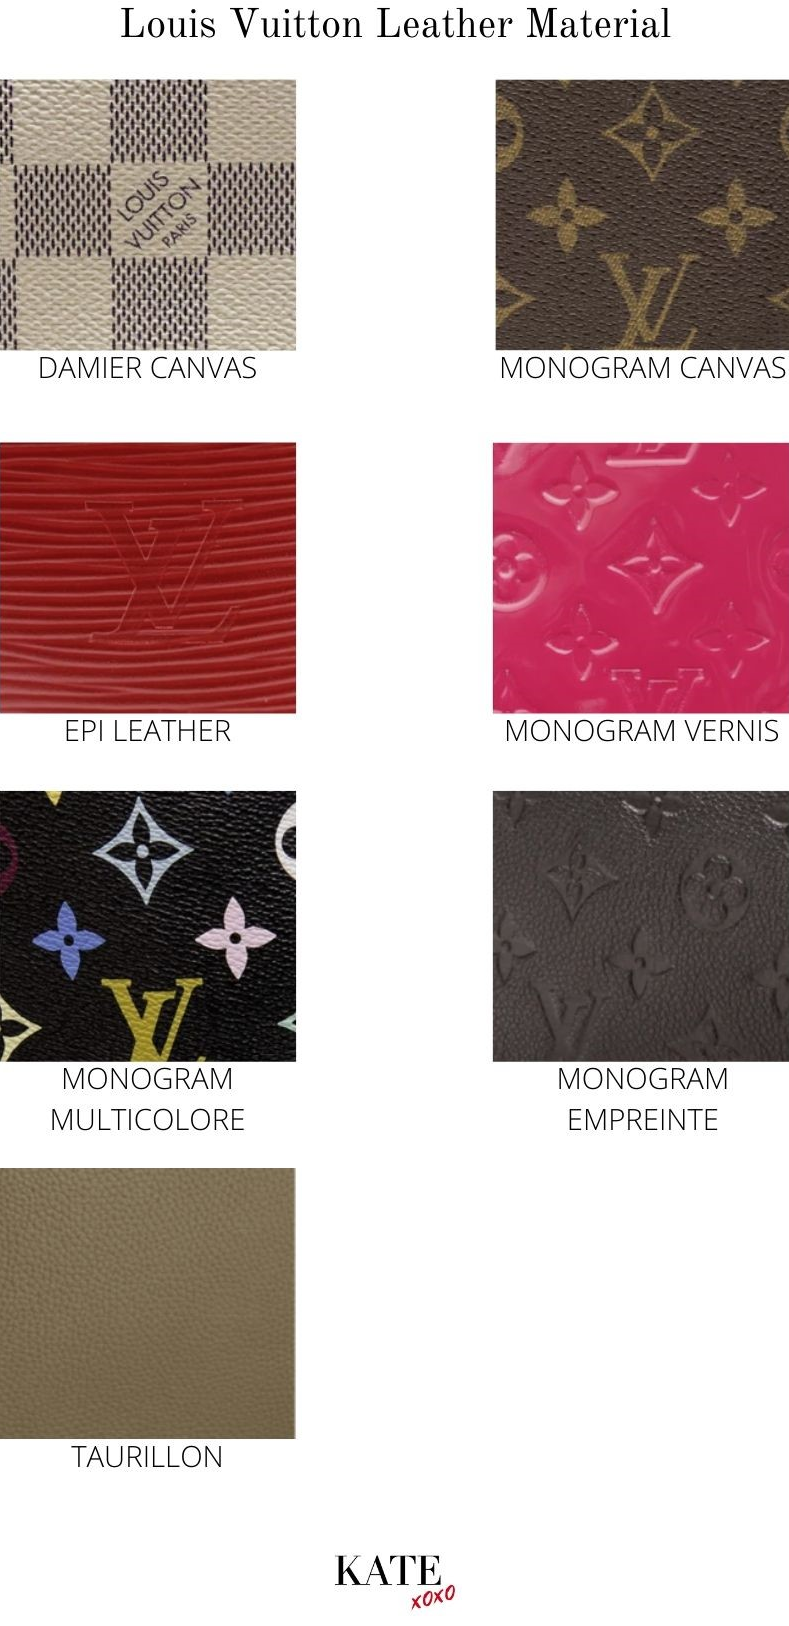 Louis Vuitton Leather Material 